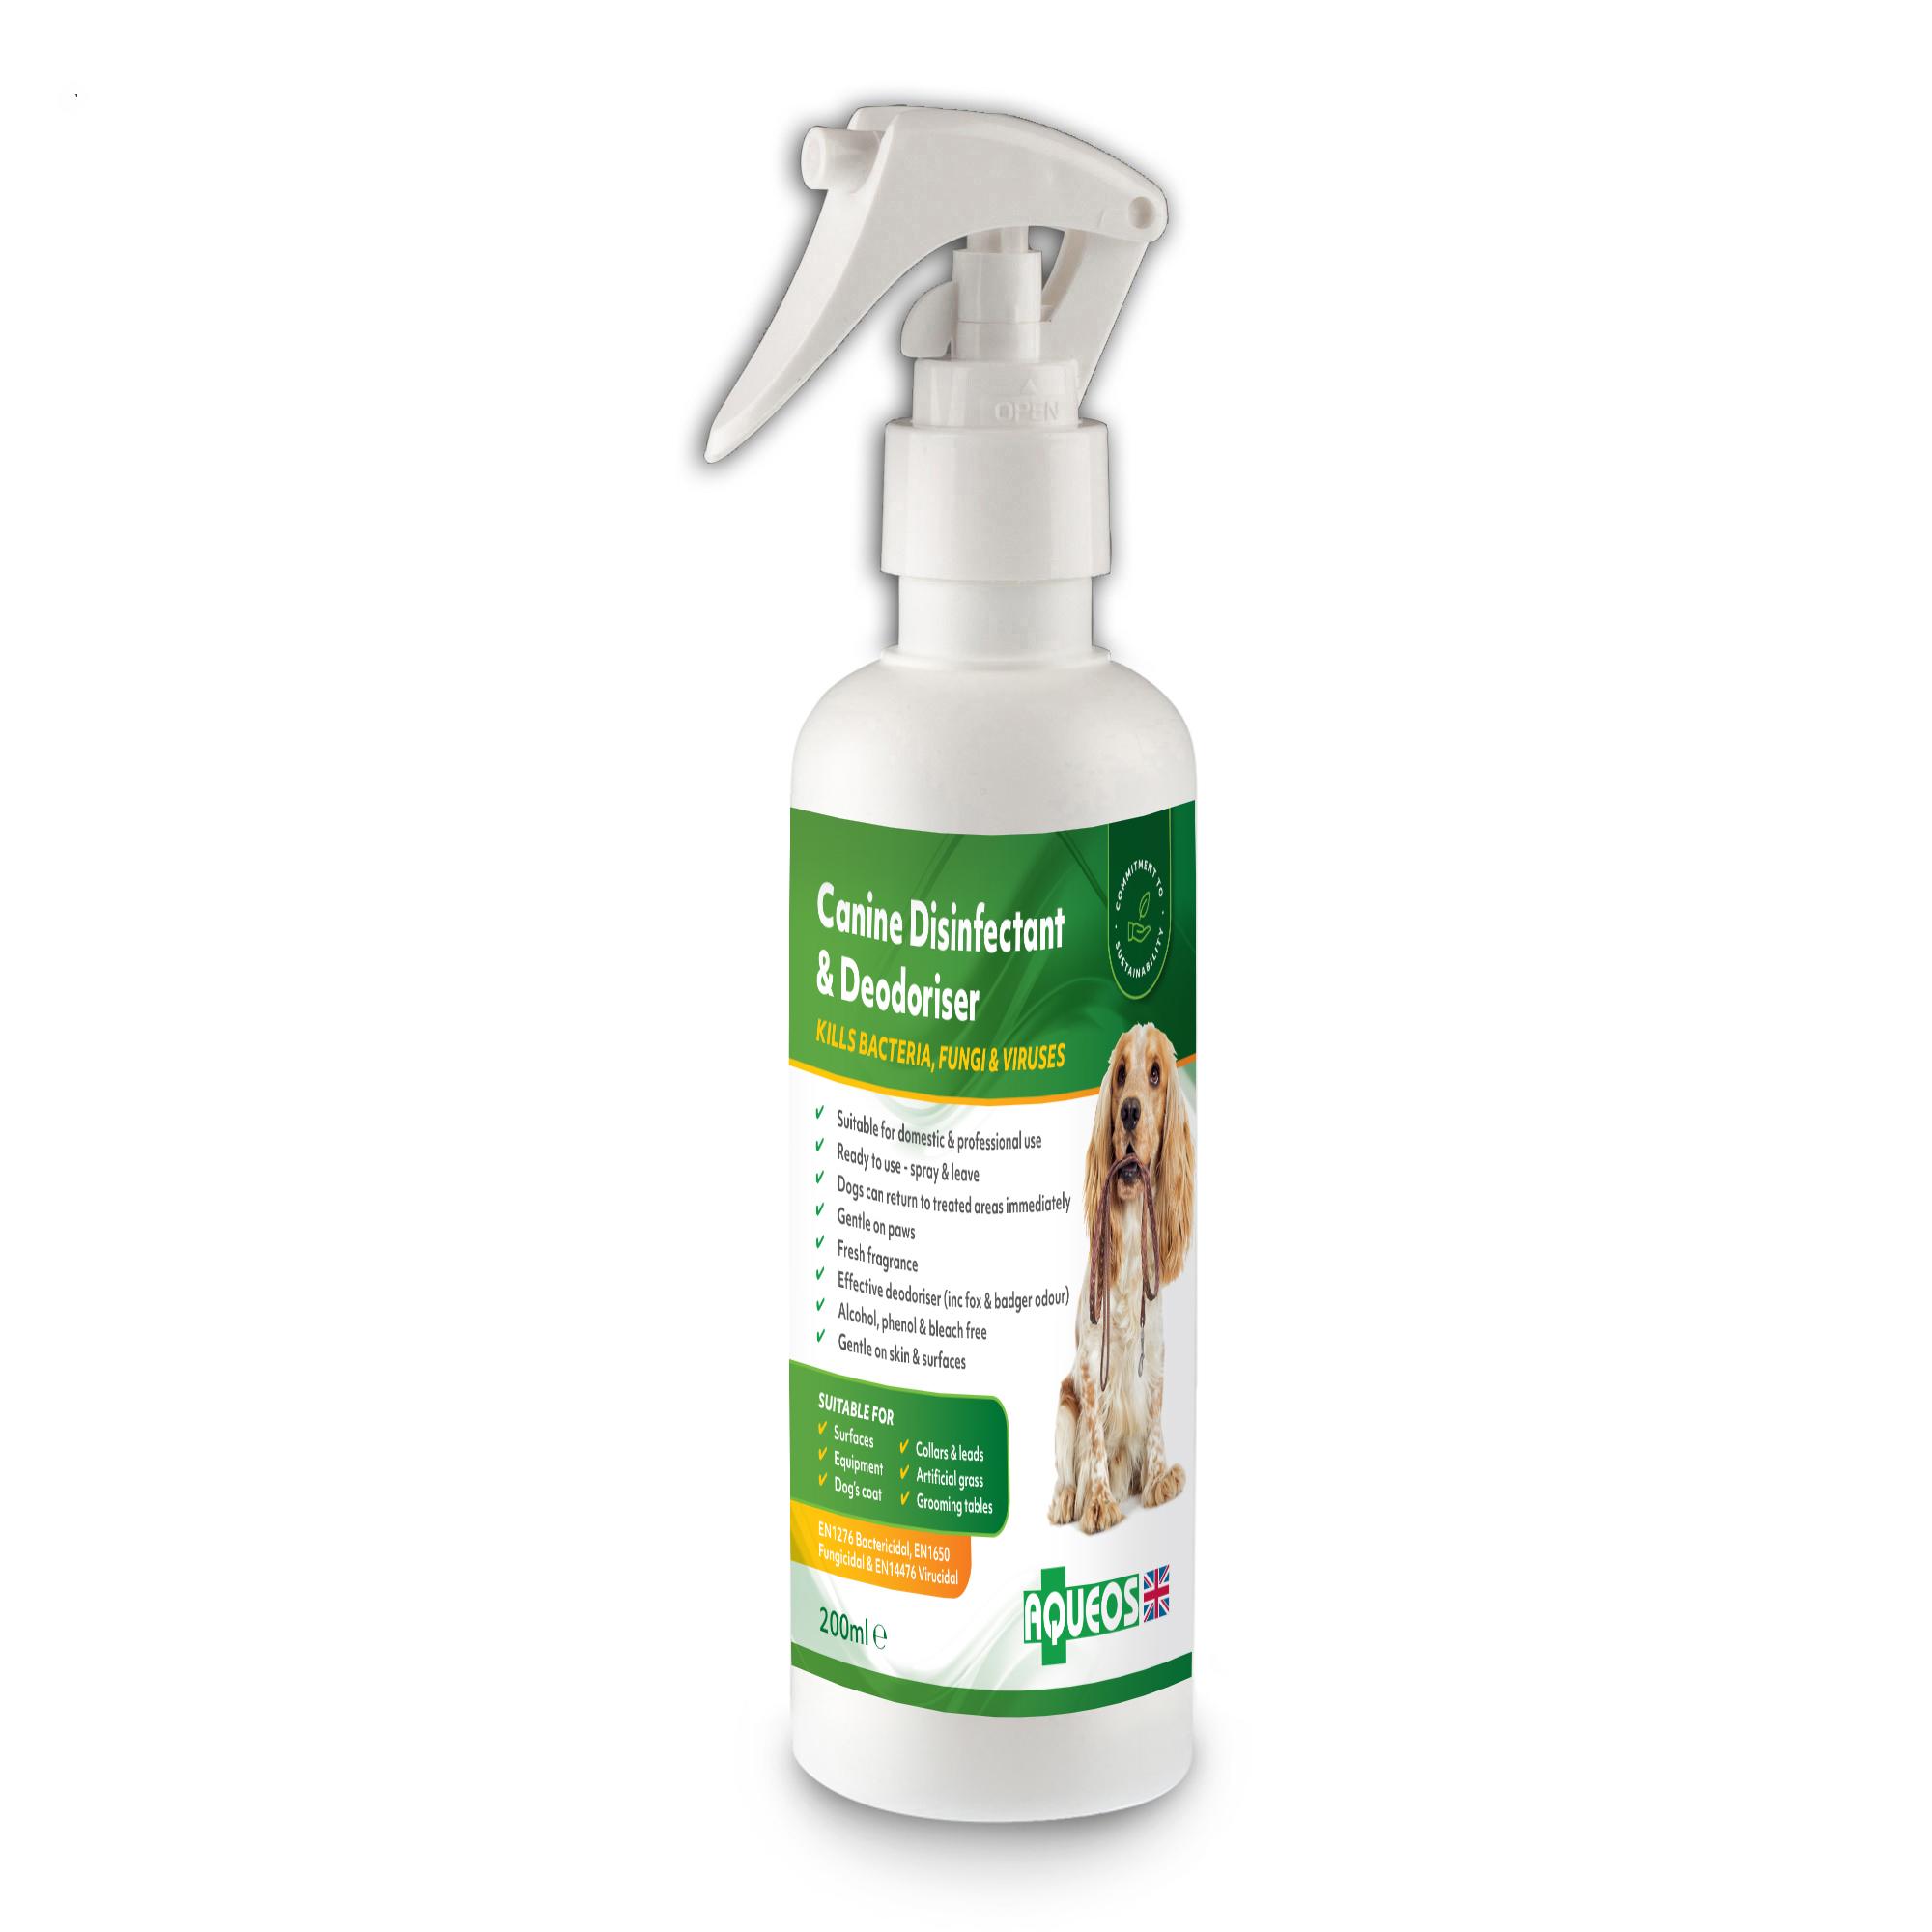 Disinfectant and deodoriser for dogs